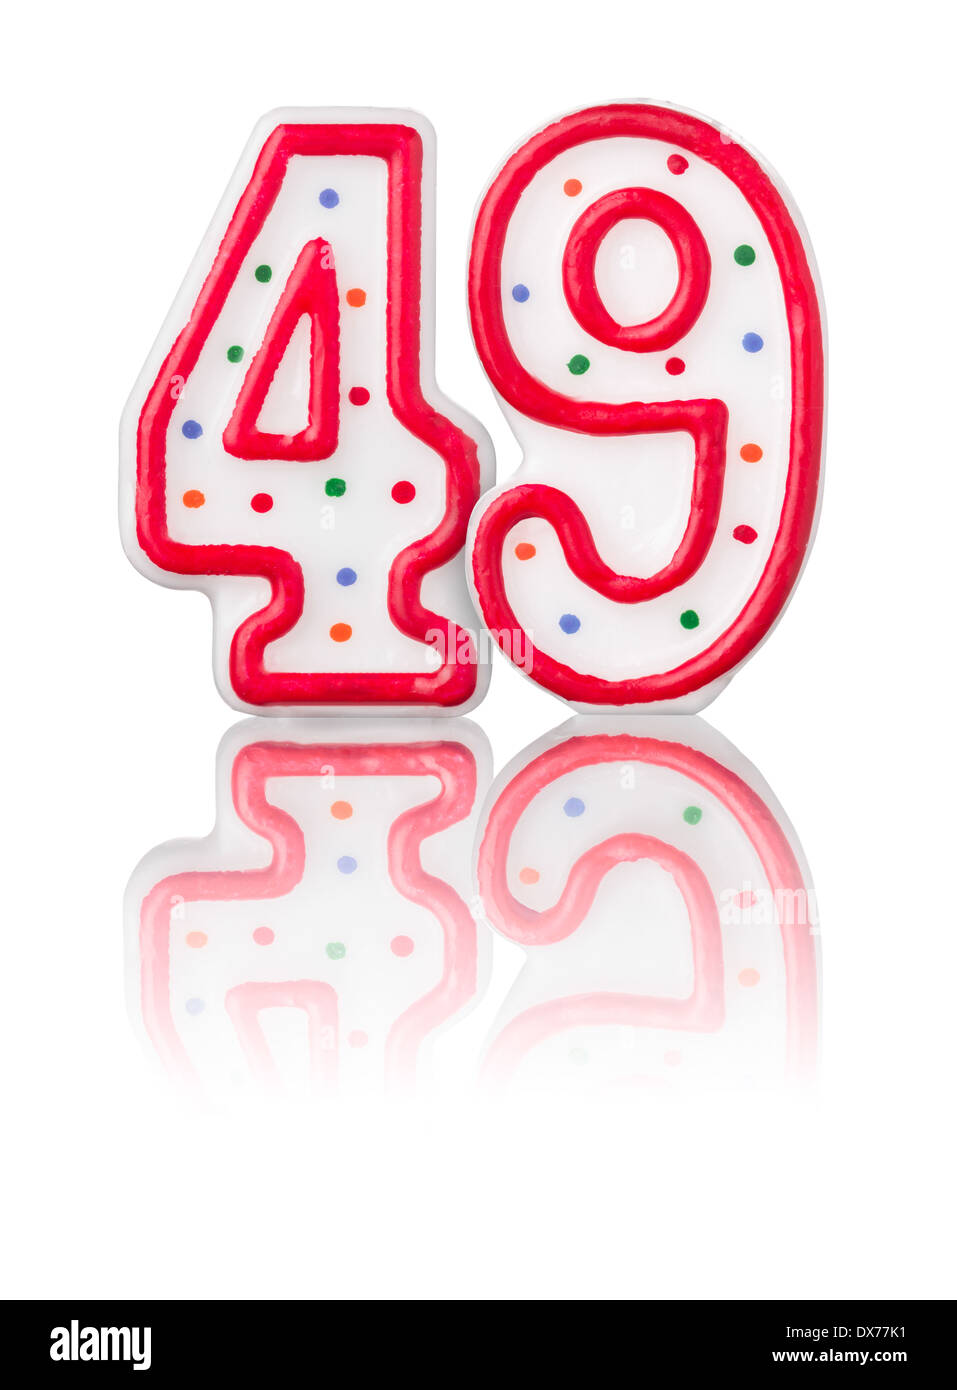 Red number 49 with reflection on a white background Stock Photo